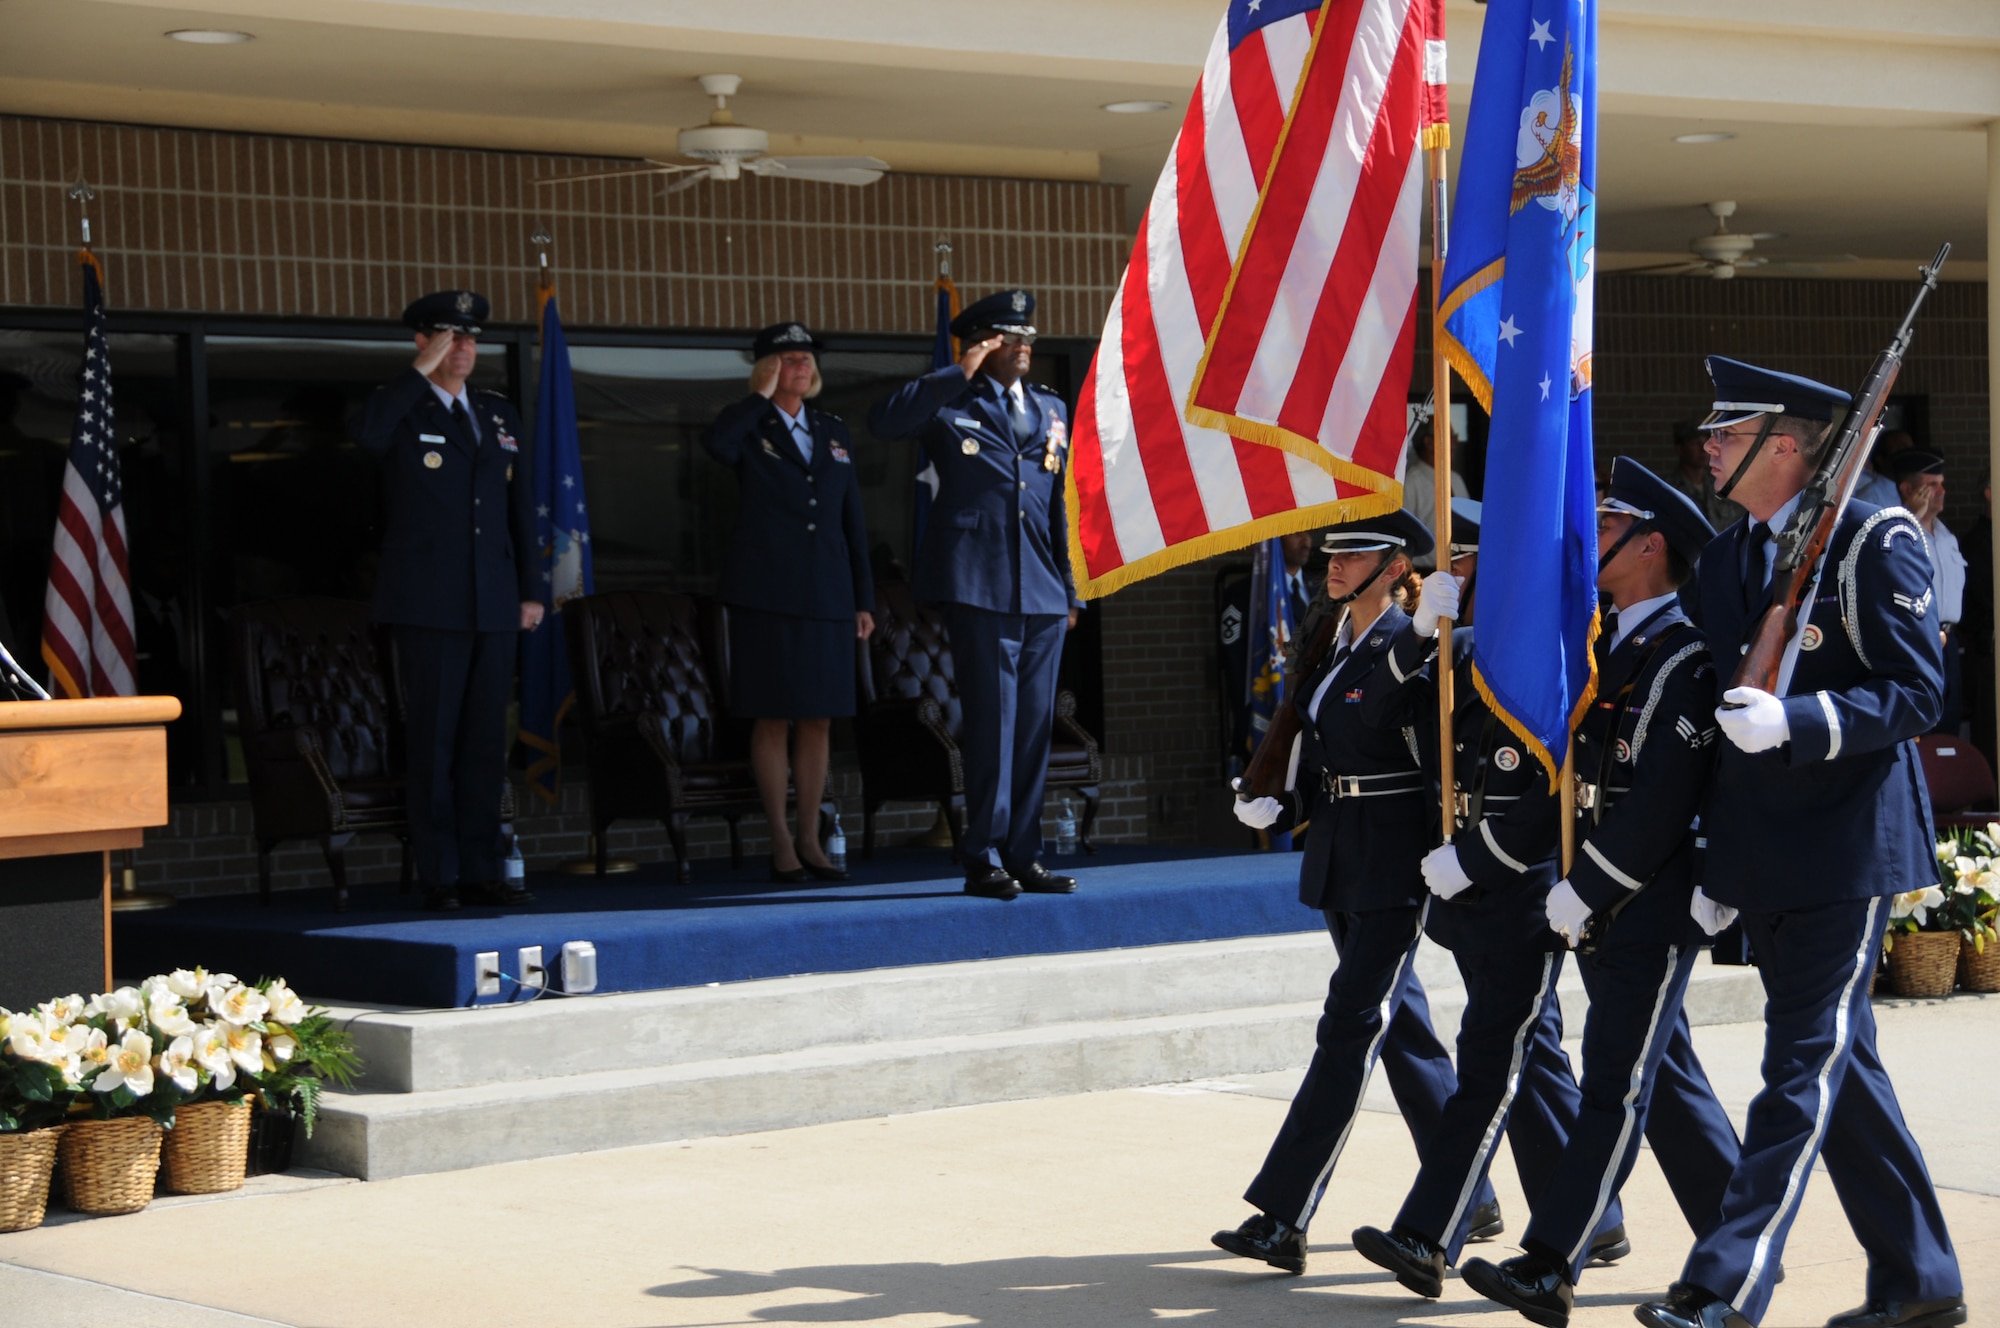 (From Left) Gen. Stephen R. Lorenz, Maj. Gen. Mary Kay Hertog and Maj. Gen. Alfred Flowers salutes the colors as Keesler's honor guard passes during the 2nd Air Force change of command ceremony here Sept. 9. General Hertog took command of 2nd Air Force from General Flowers during the ceremony held at the Levitow Parade Field.  (U.S. Air Force photo by Kemberly Groue)